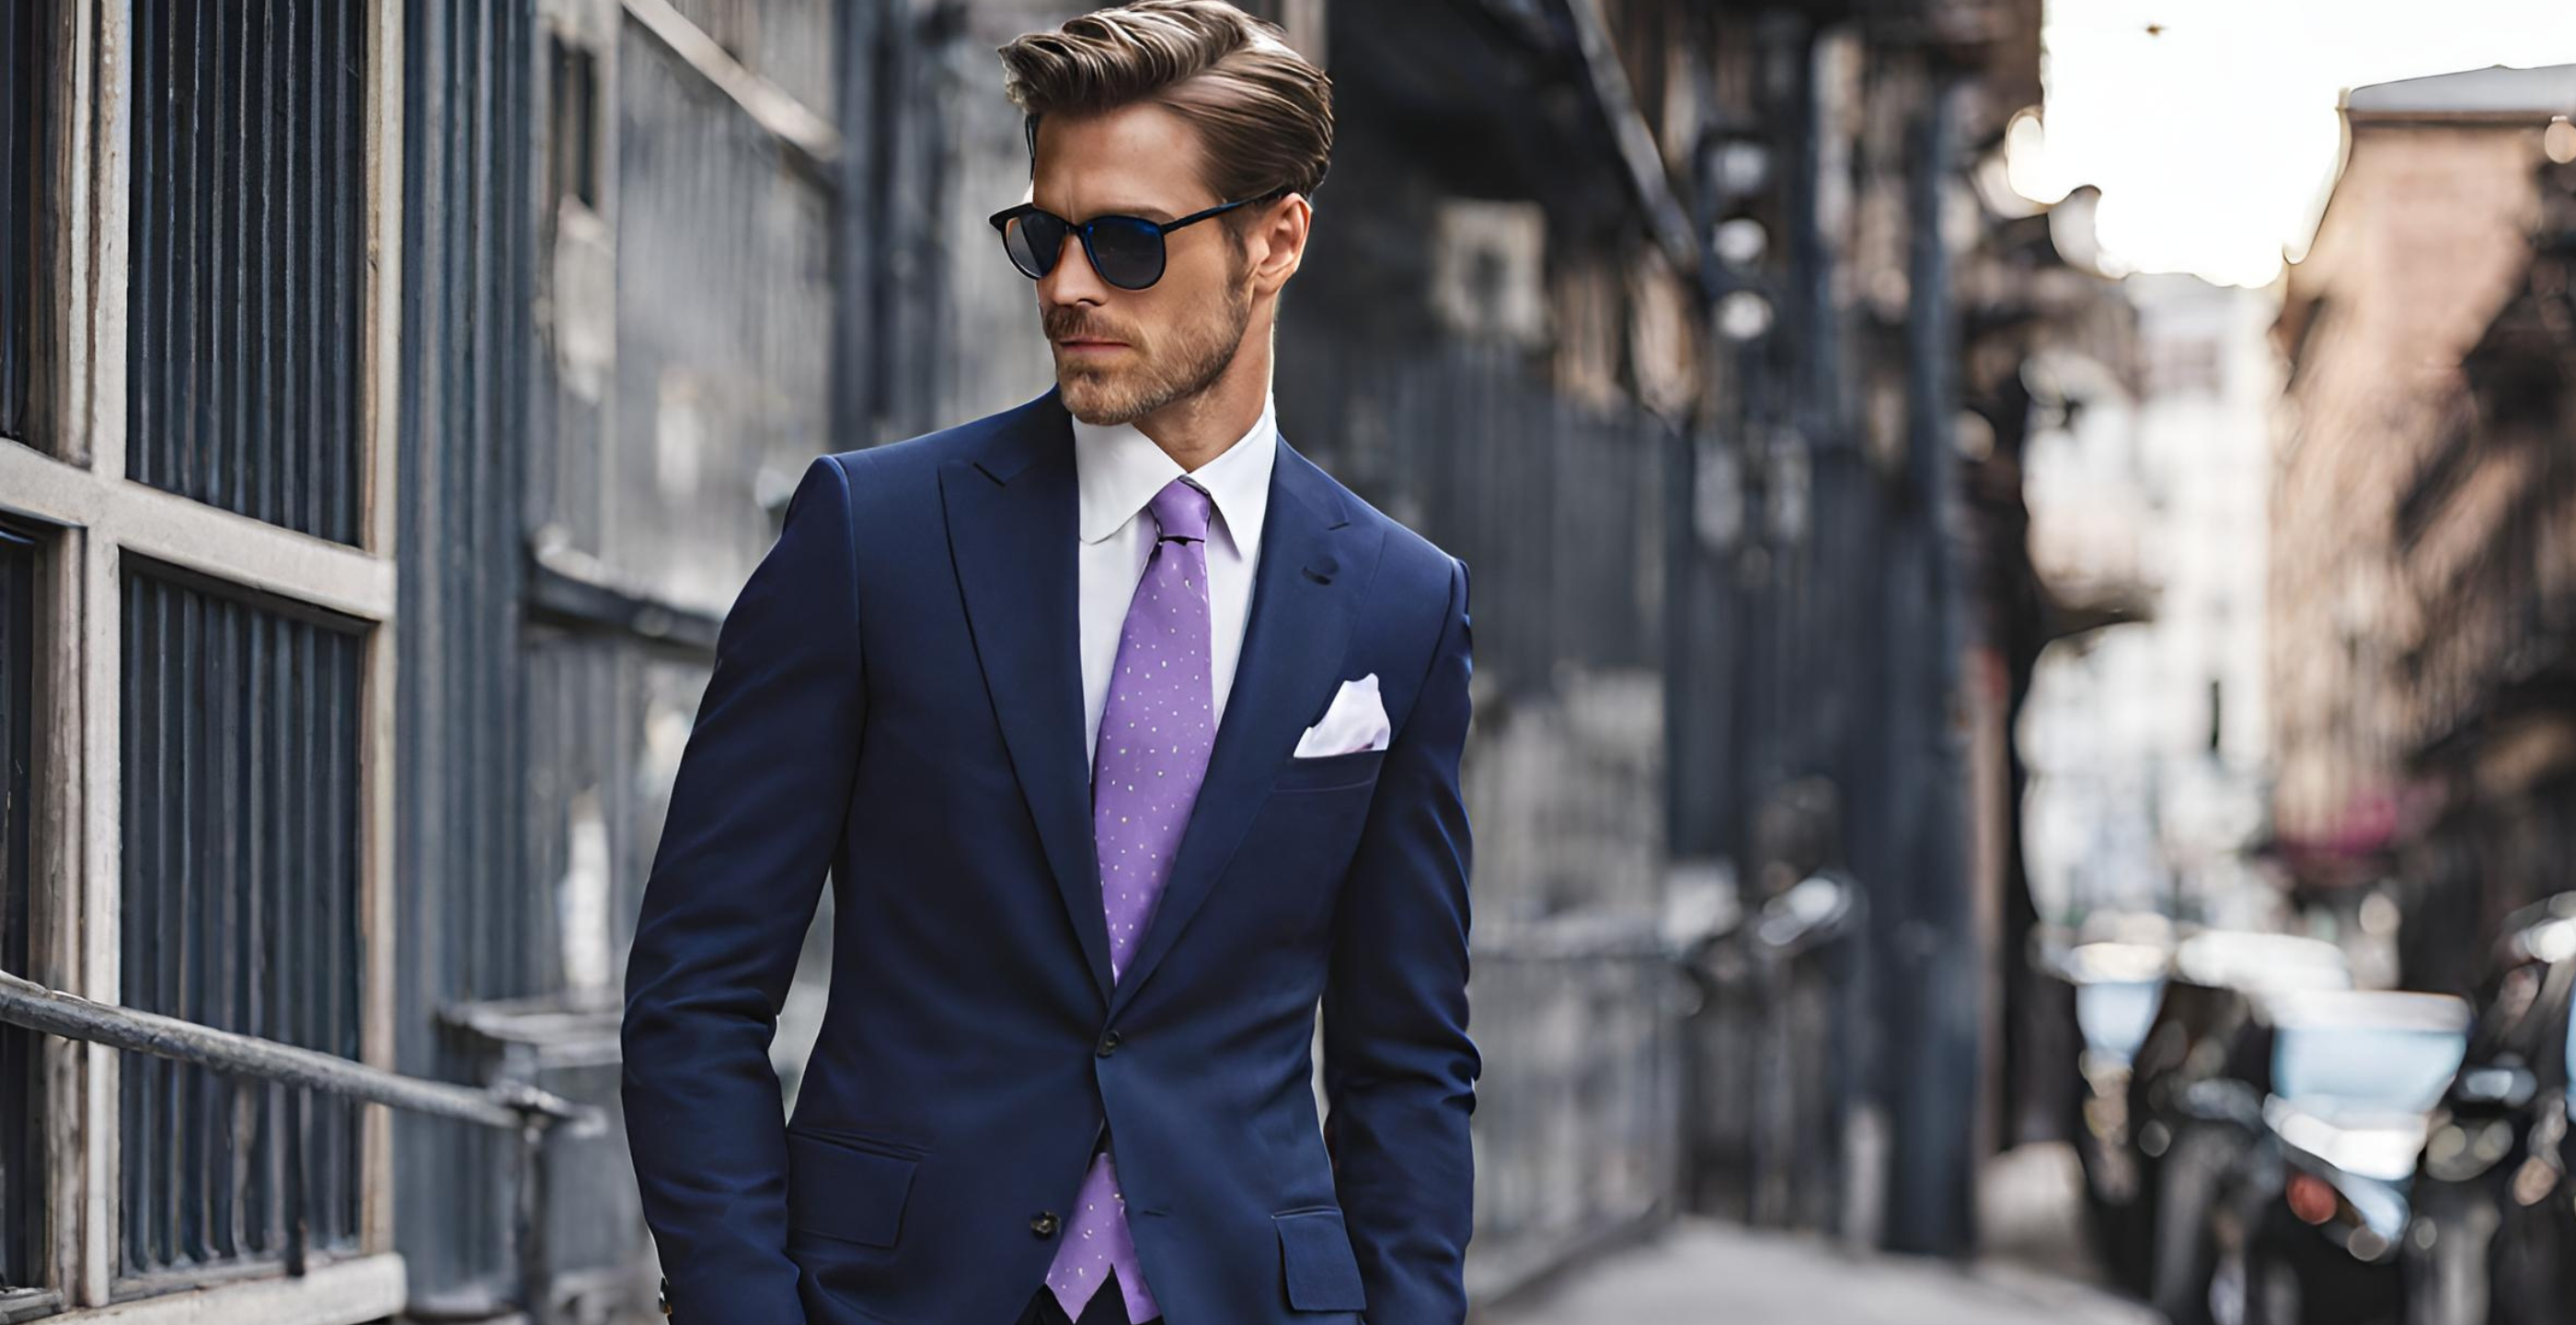 Classic Navy suit to wear with a lavender tie